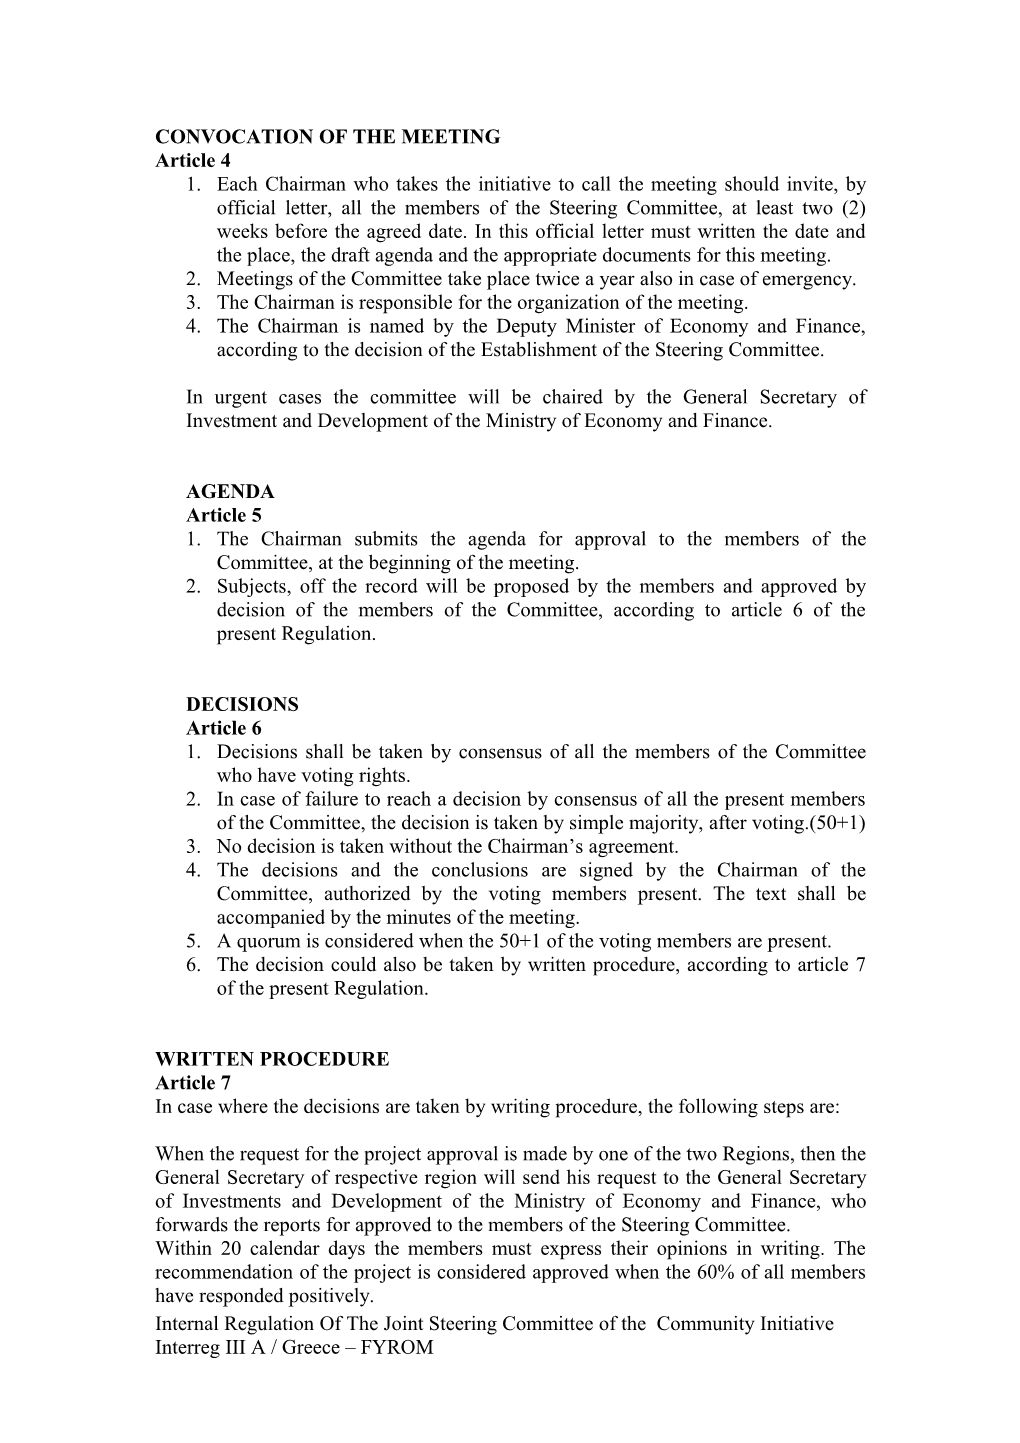 Establishment and Tasks of the Steering Committee